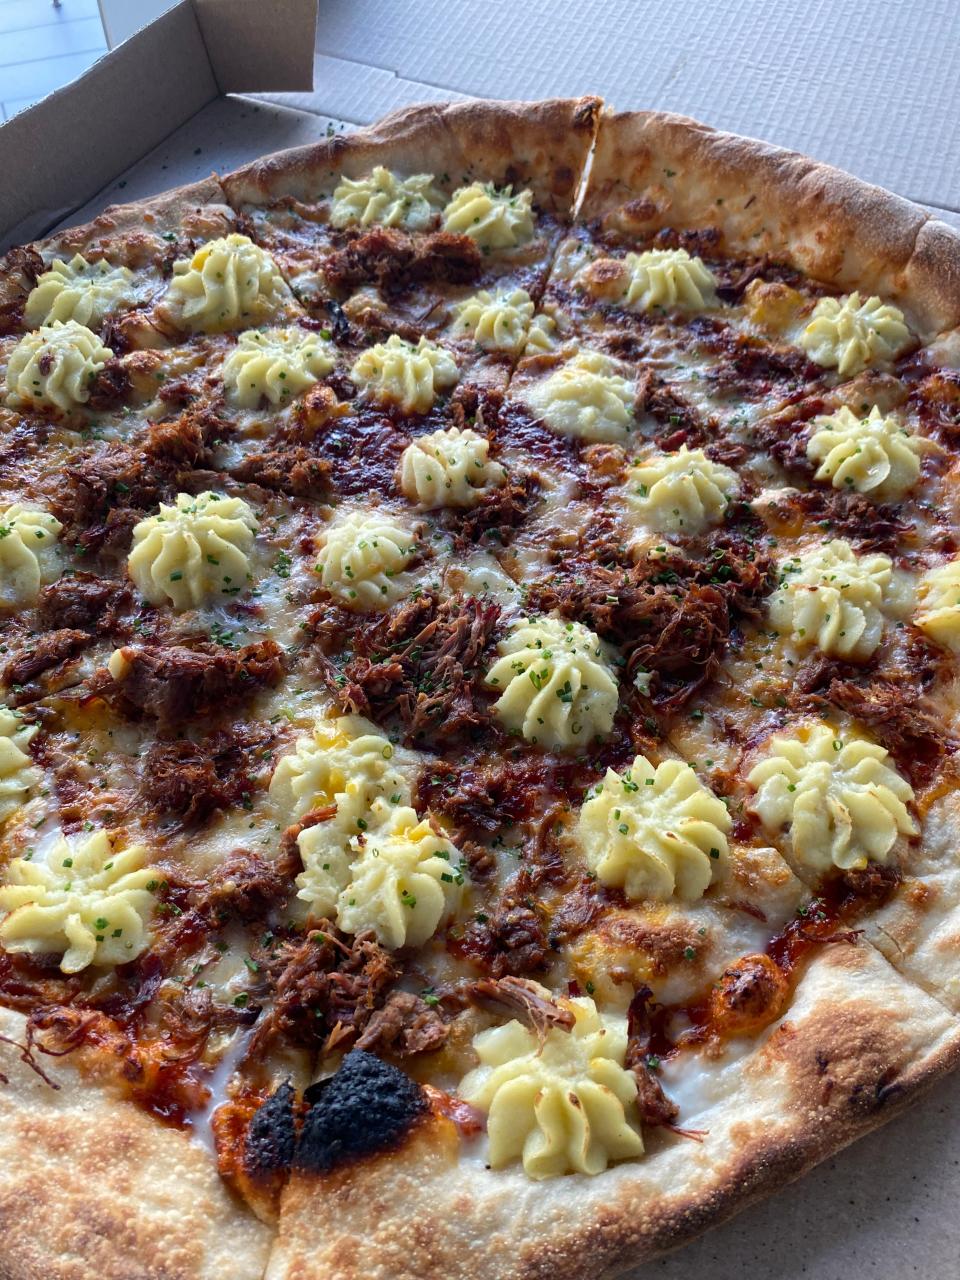 A monthly pizza special from Dado's Pizza, featuring brisket from Butcher Bar-B-Q stand and potatoes.